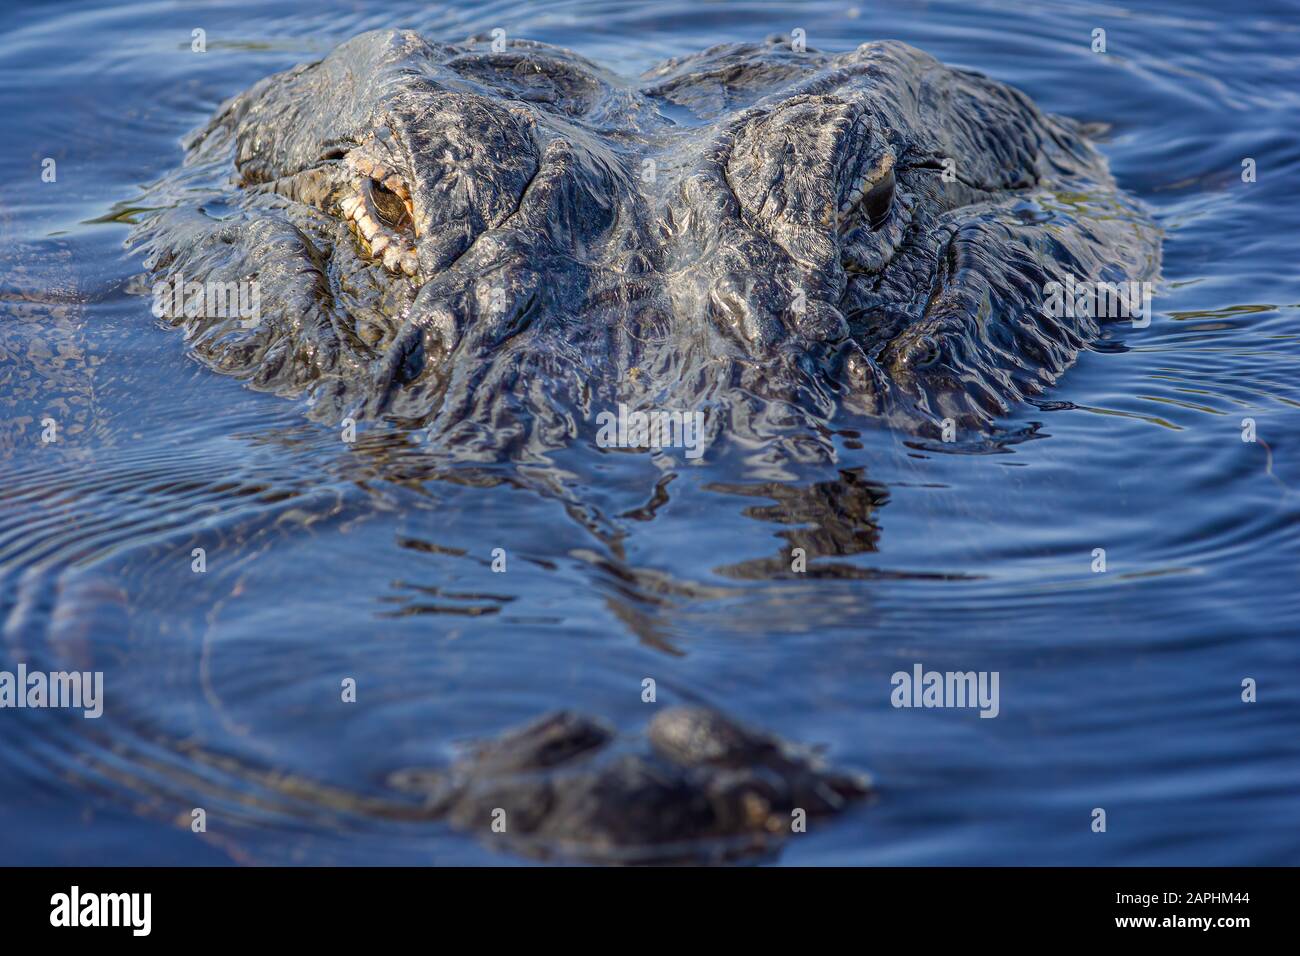 A close up of an American Alligator in the Florida Everglades. The alligator is the apex predator of the Everglades. Stock Photo